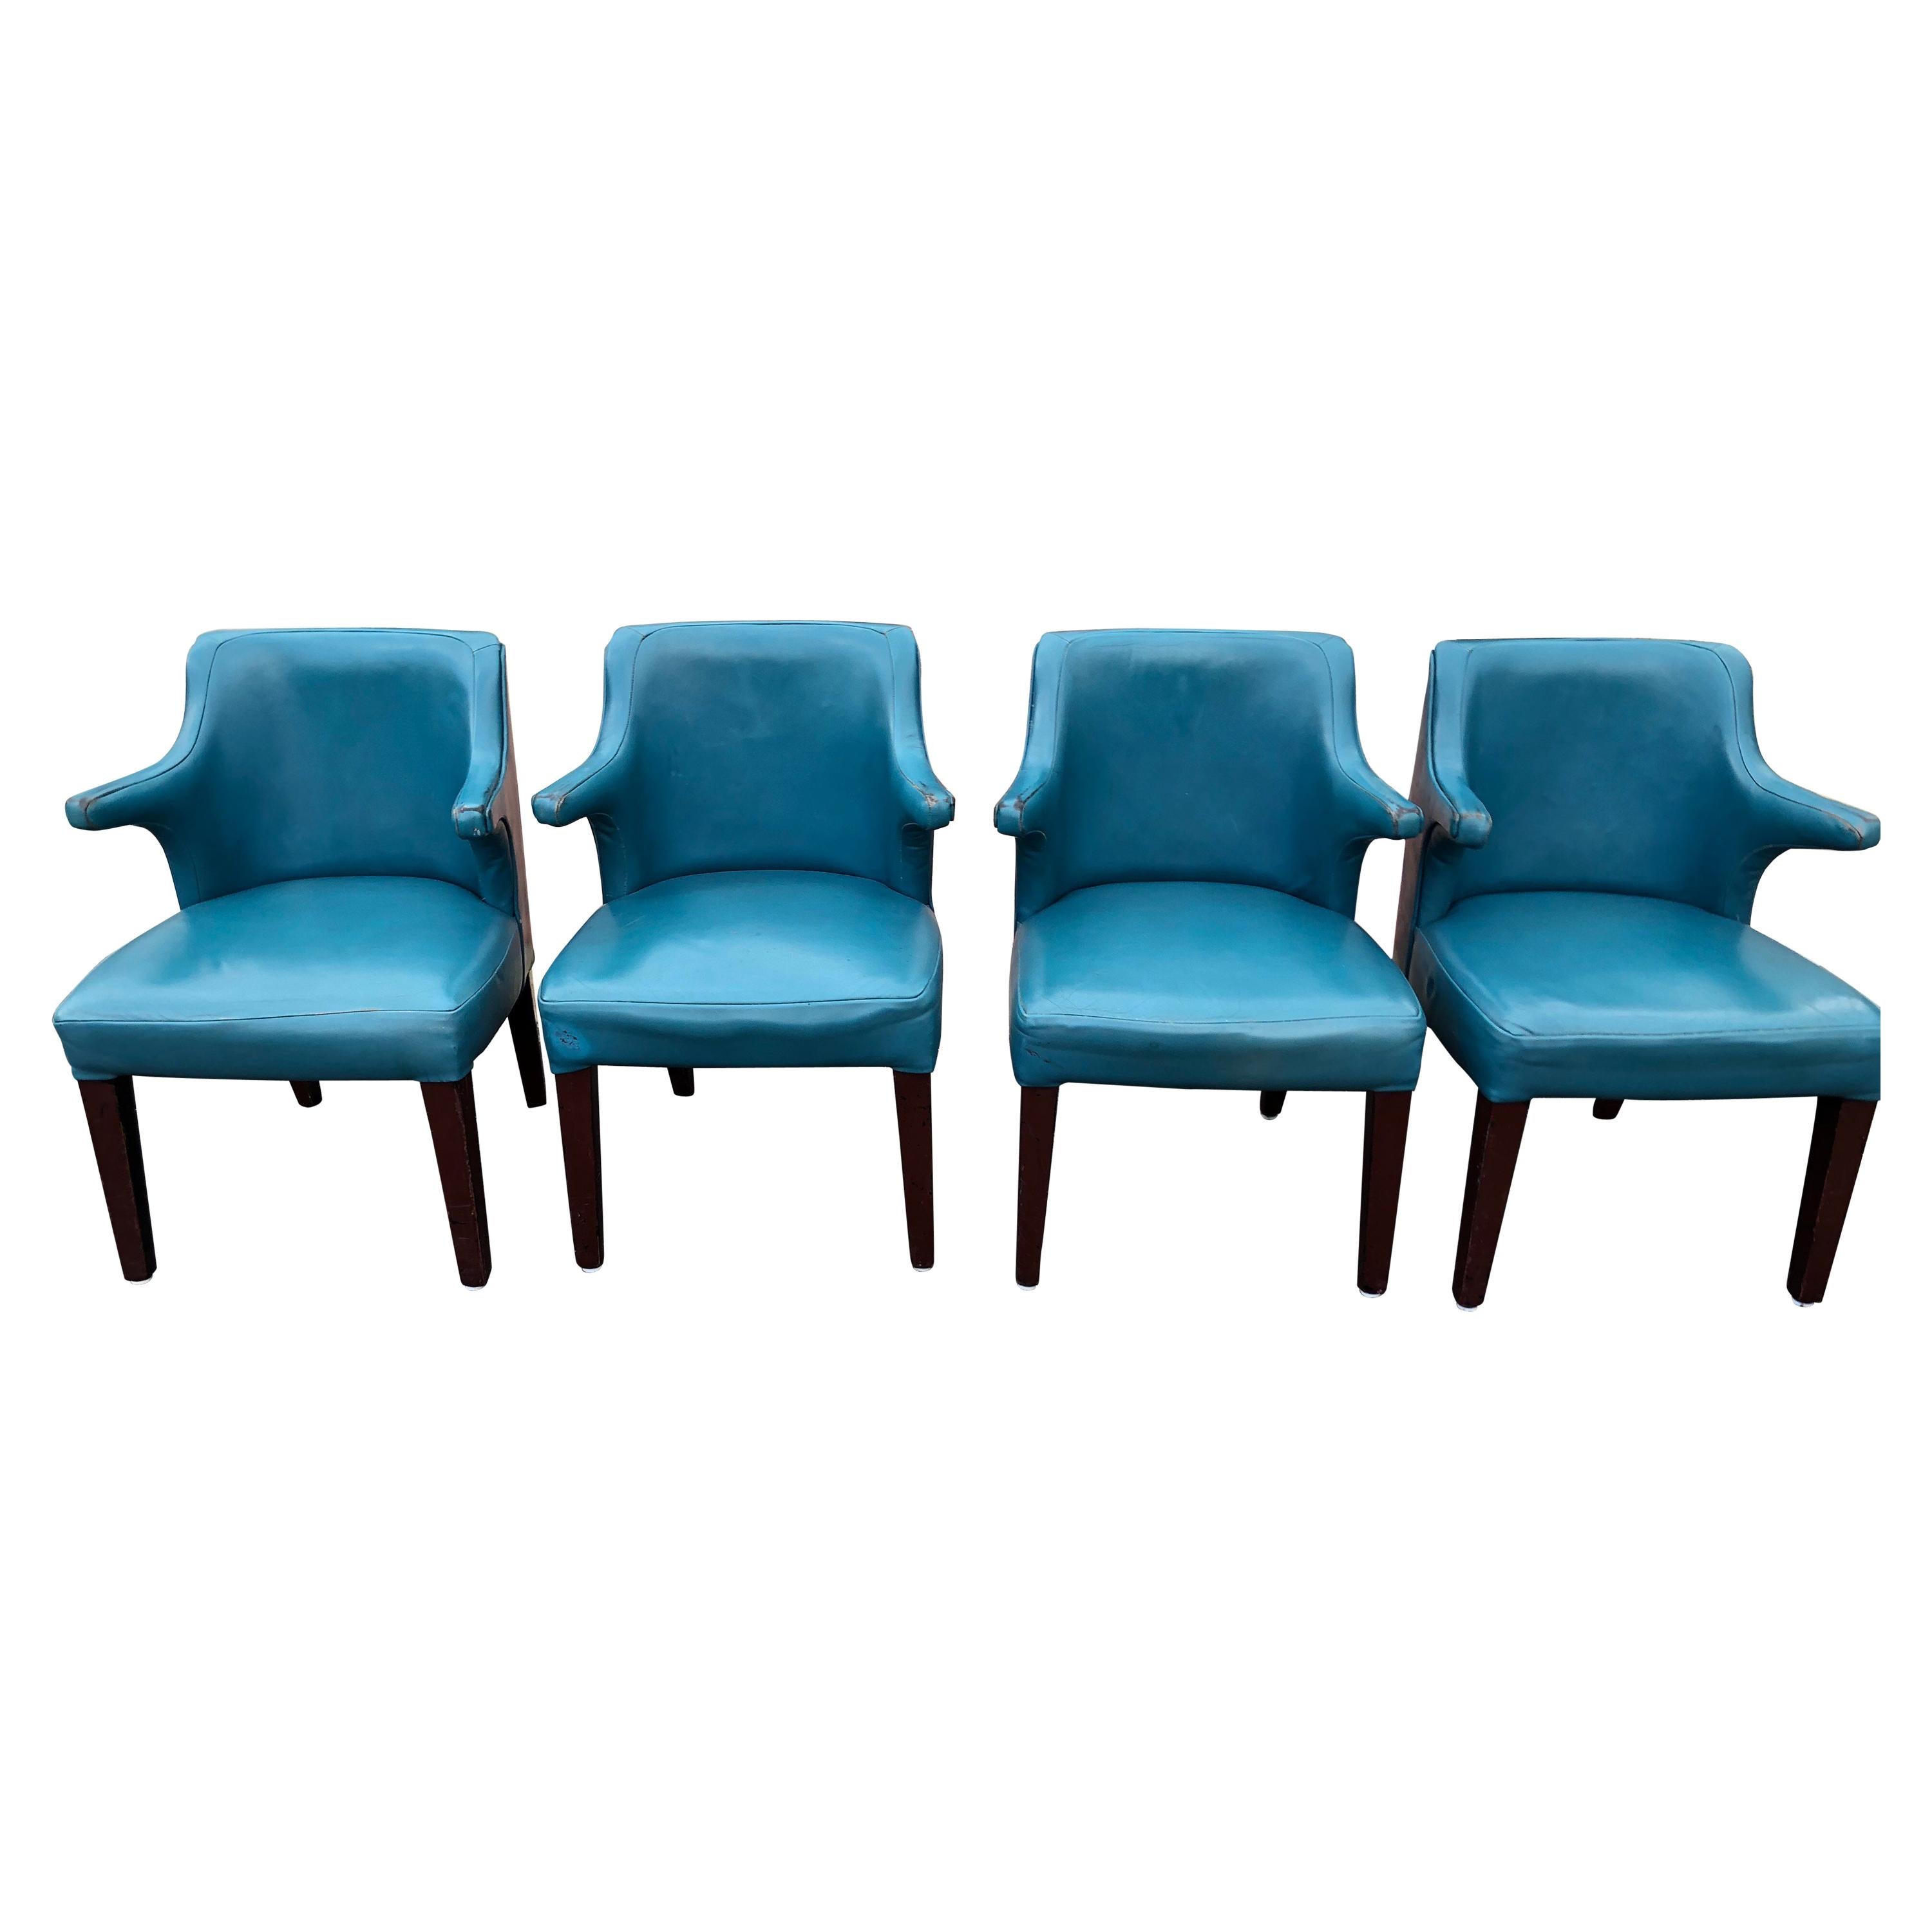 Set of Four Mid-Century Modern Chairs in Peacock Blue